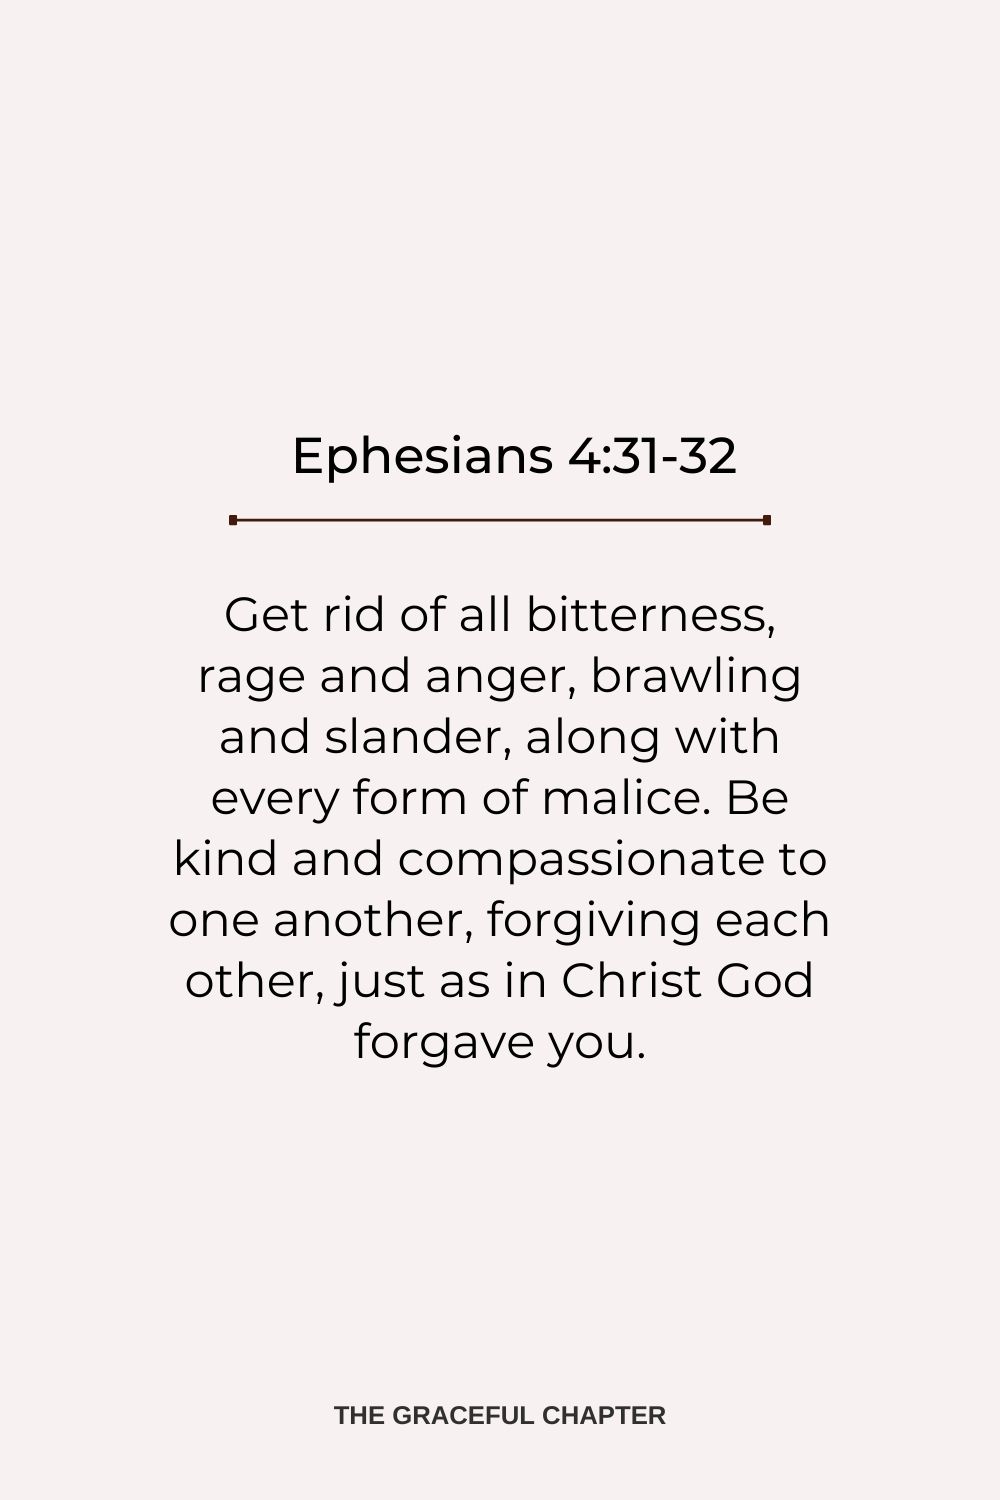 Get rid of all bitterness, rage and anger, brawling and slander, along with every form of malice. Be kind and compassionate to one another, forgiving each other, just as in Christ God forgave you. Ephesians 4:31-32